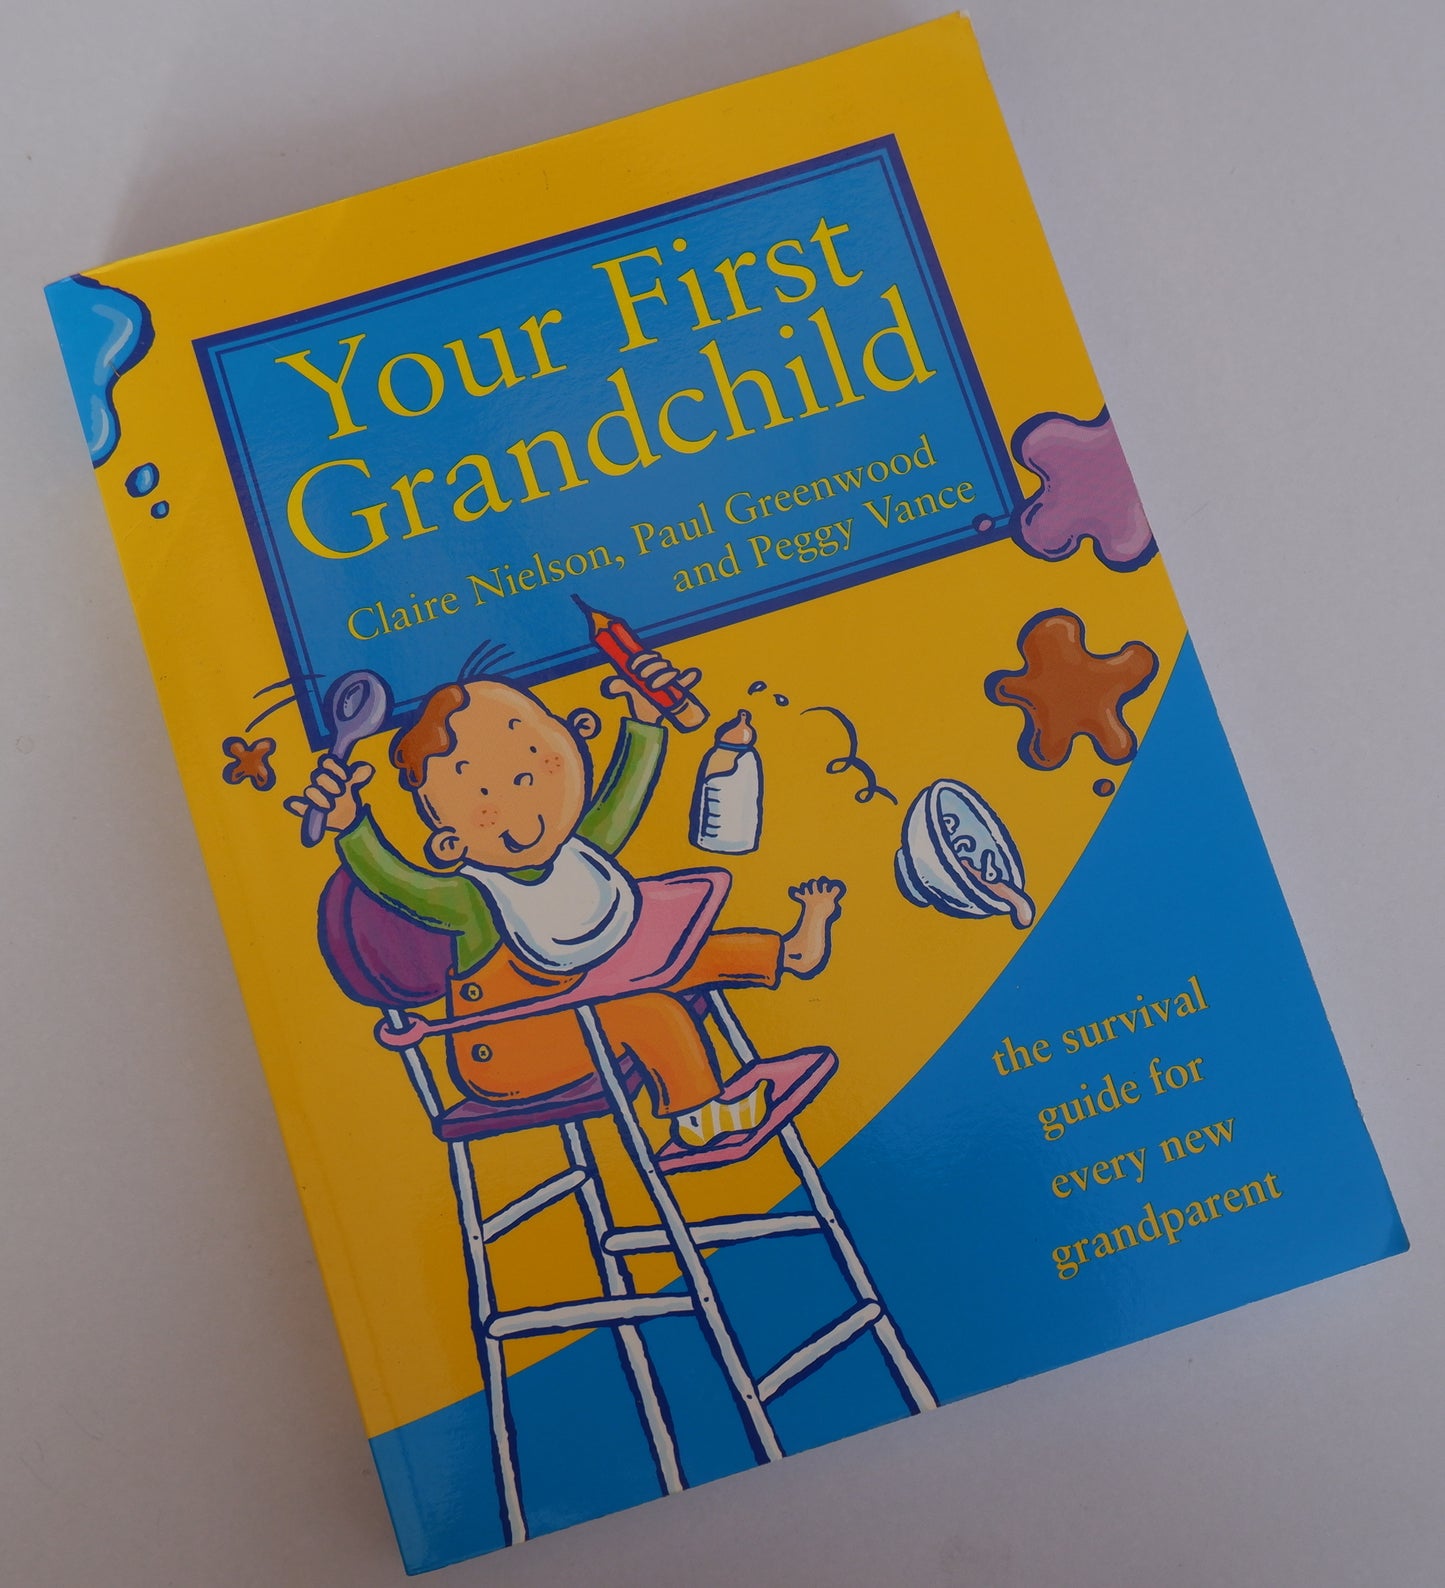 Your First Grandchild: The Survival guide for every new grandparent: Peggy Vance